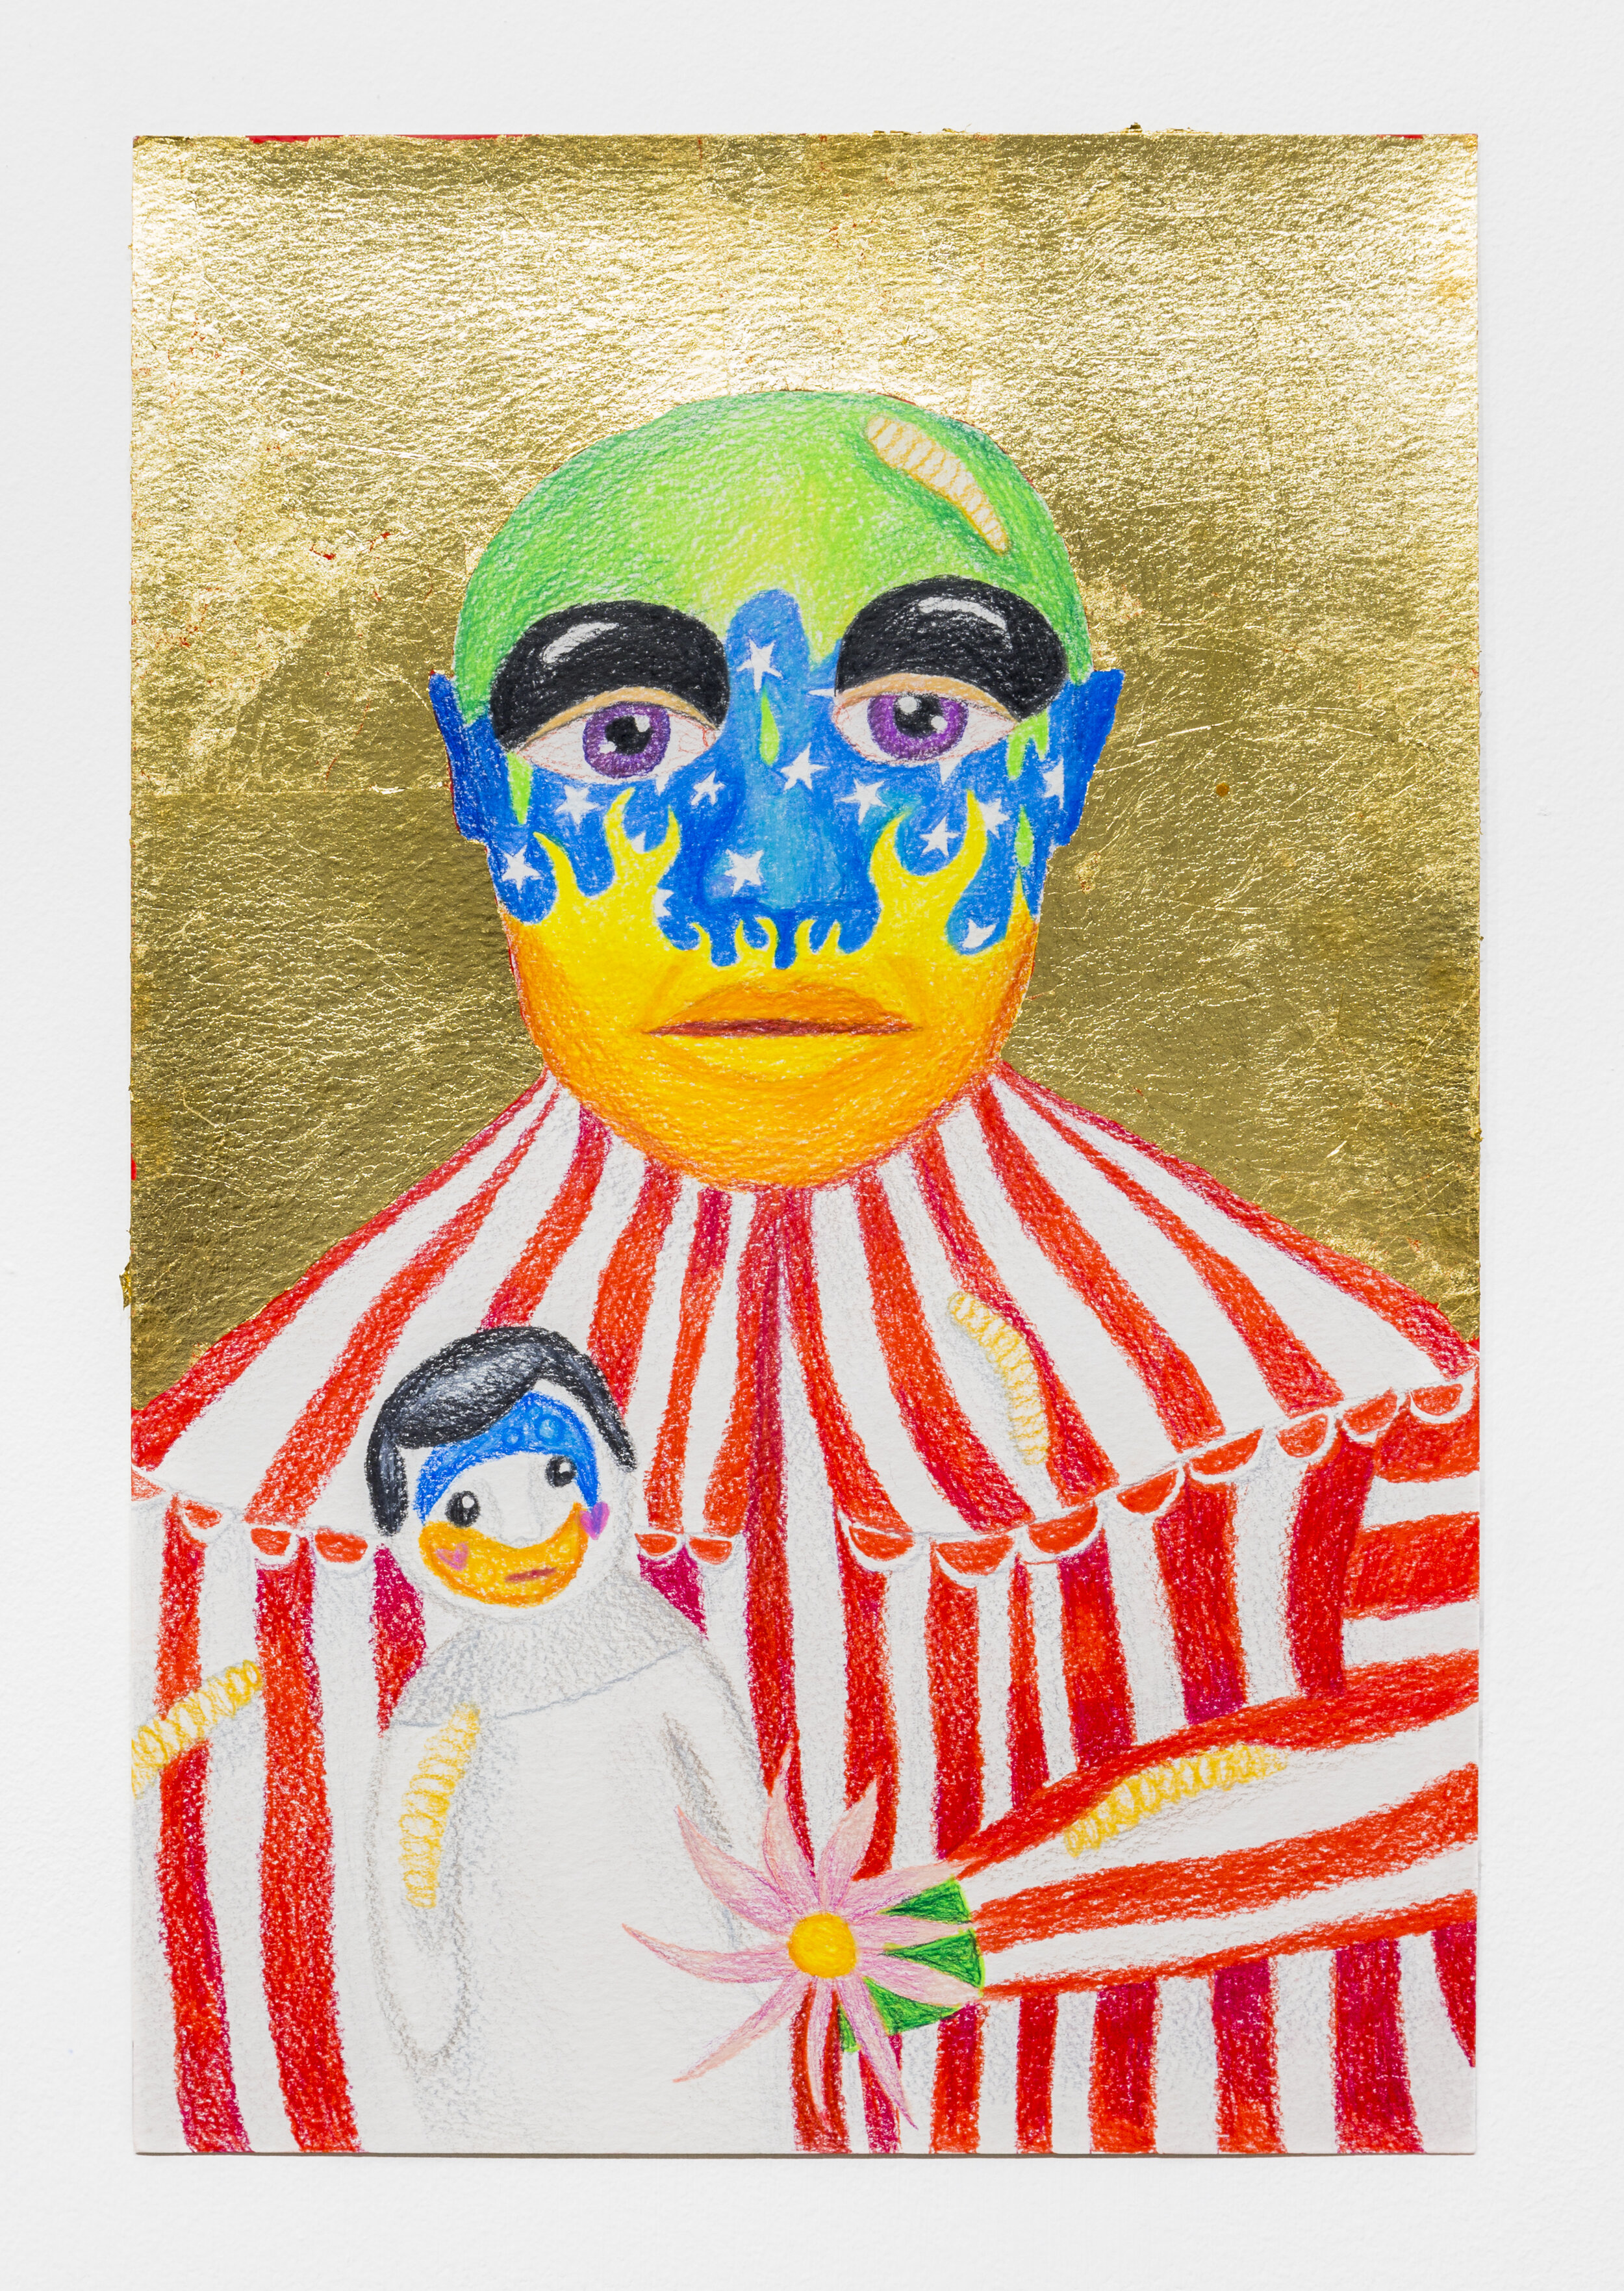   Tidepodphagia #2 (Girl with Doll and maggots),  2018  18 x 12 inches (45.72 x 30.48 cm.)  Colored pencil and gold leaf on paper 